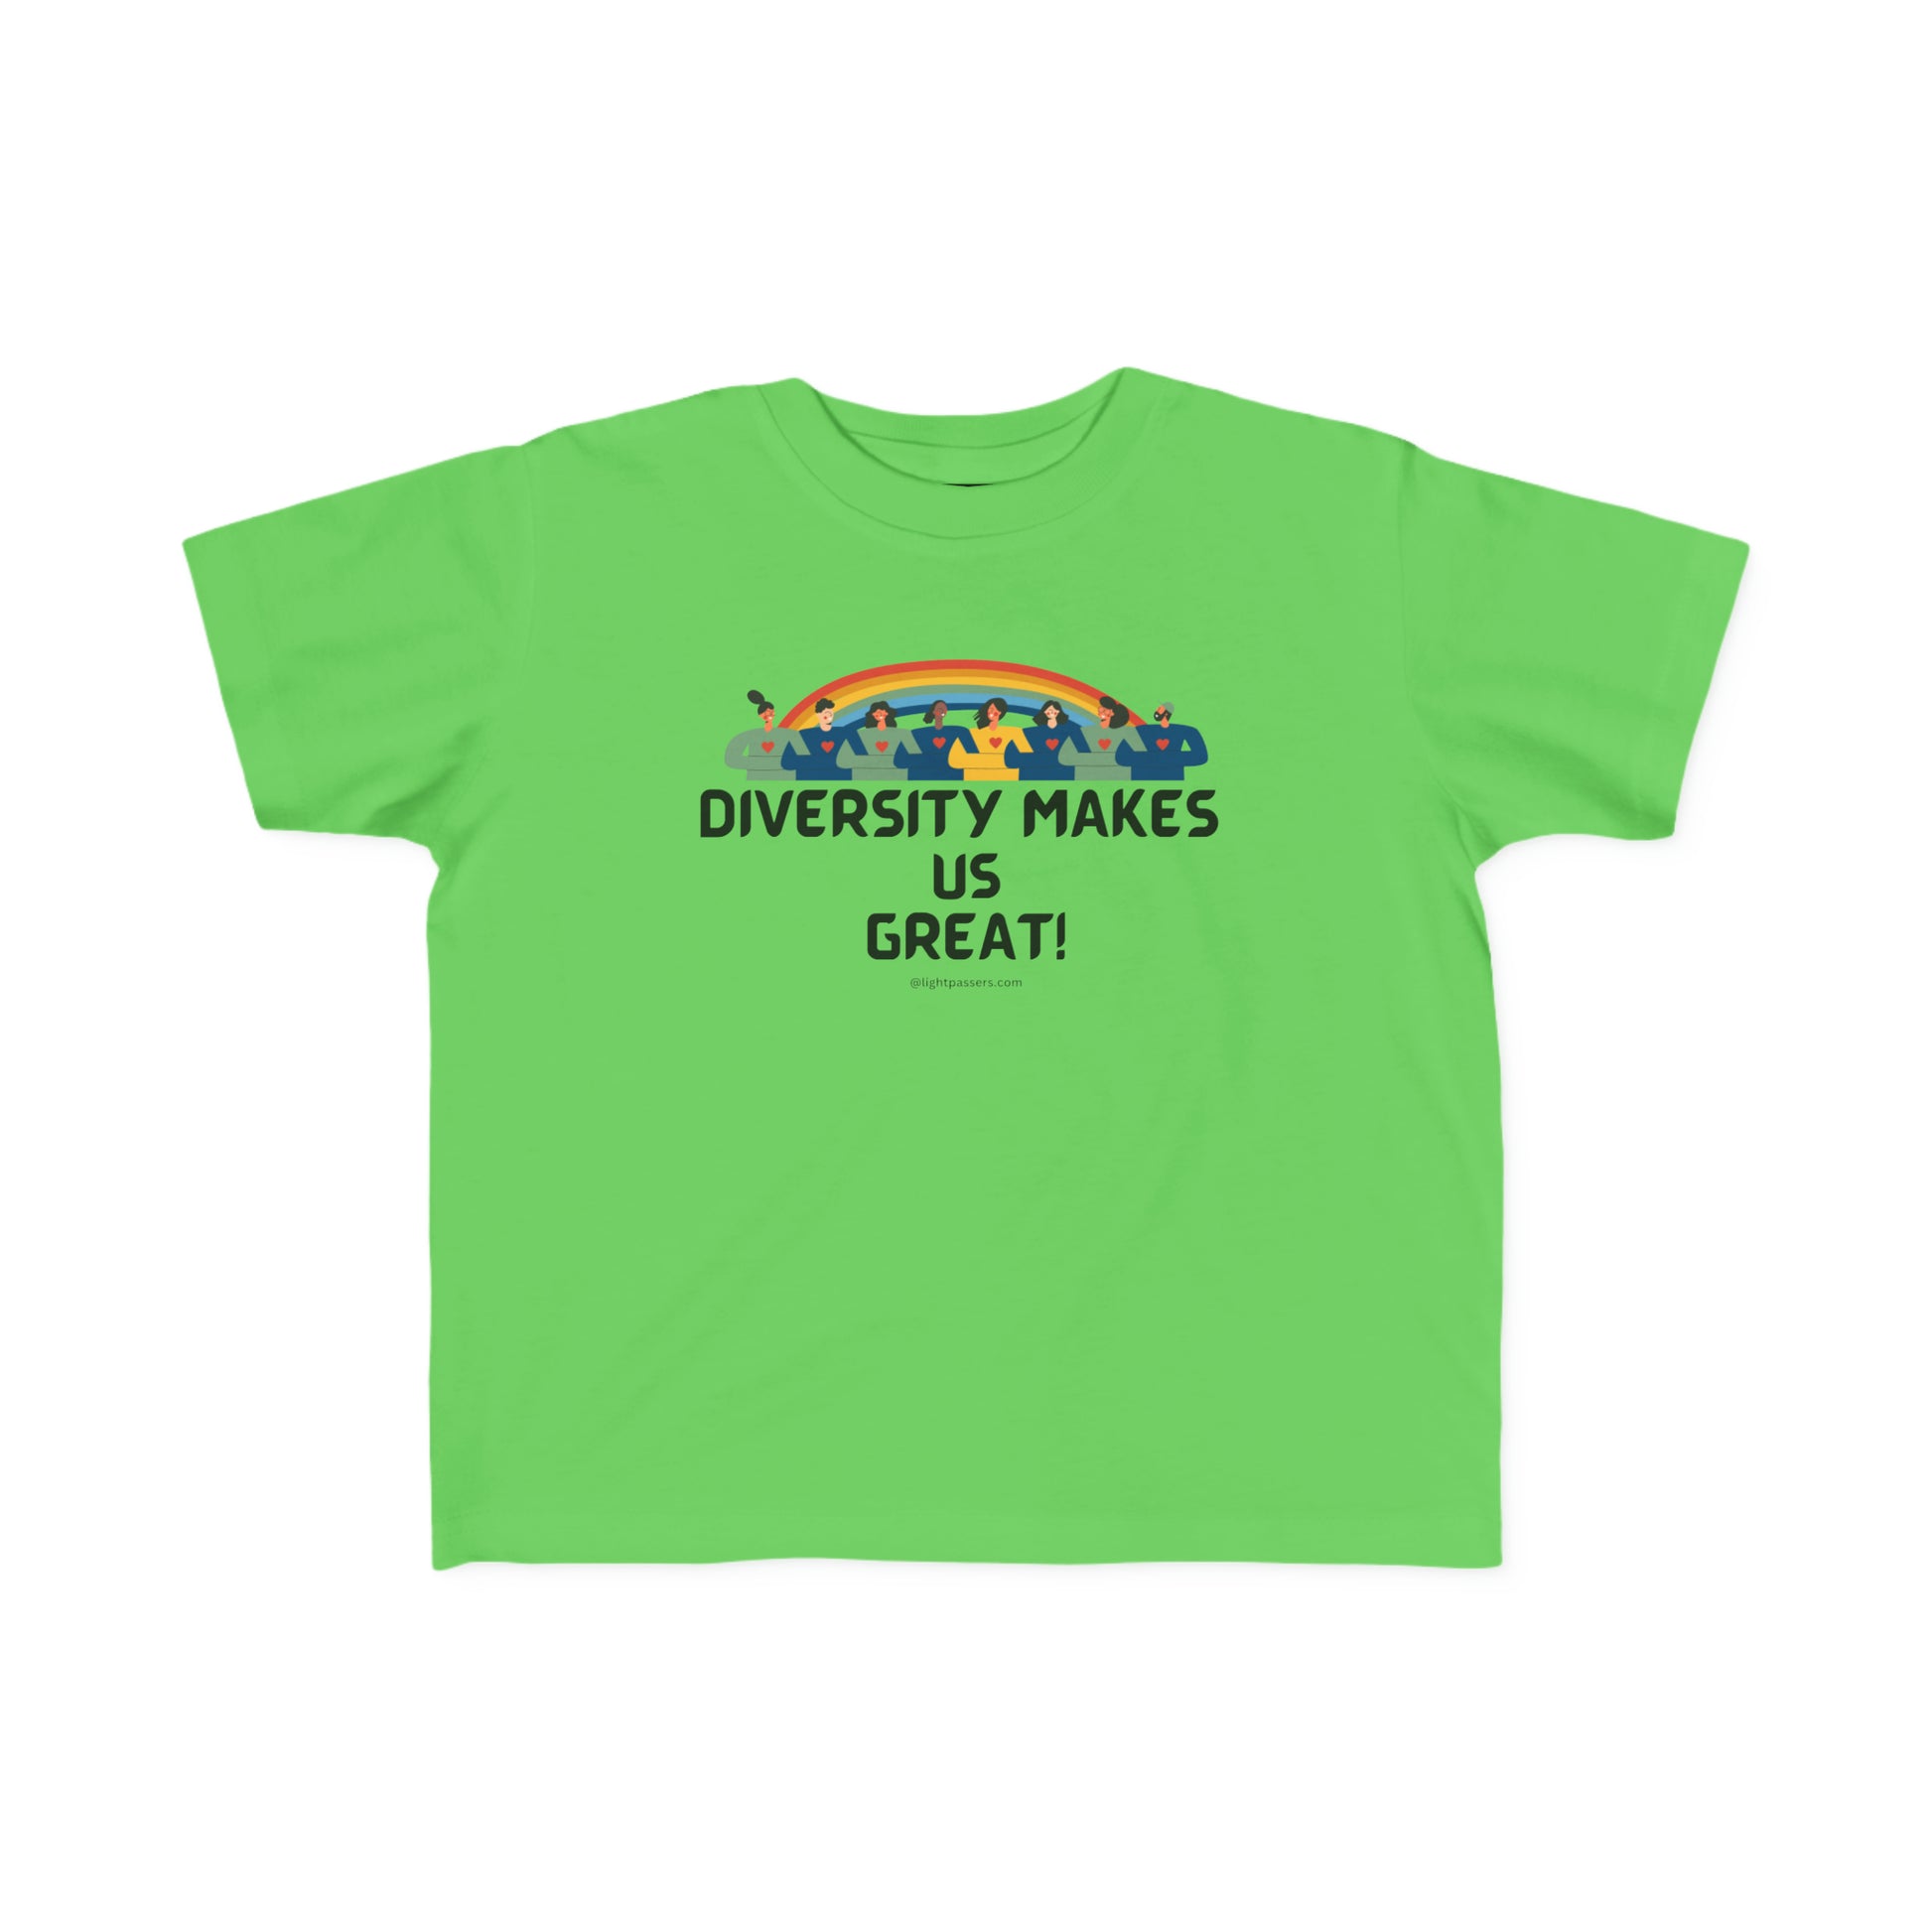 A toddler tee featuring Diversity Makes Us Great text with a rainbow design. Made of soft, durable 100% combed cotton, light fabric, tear-away label, and a classic fit.